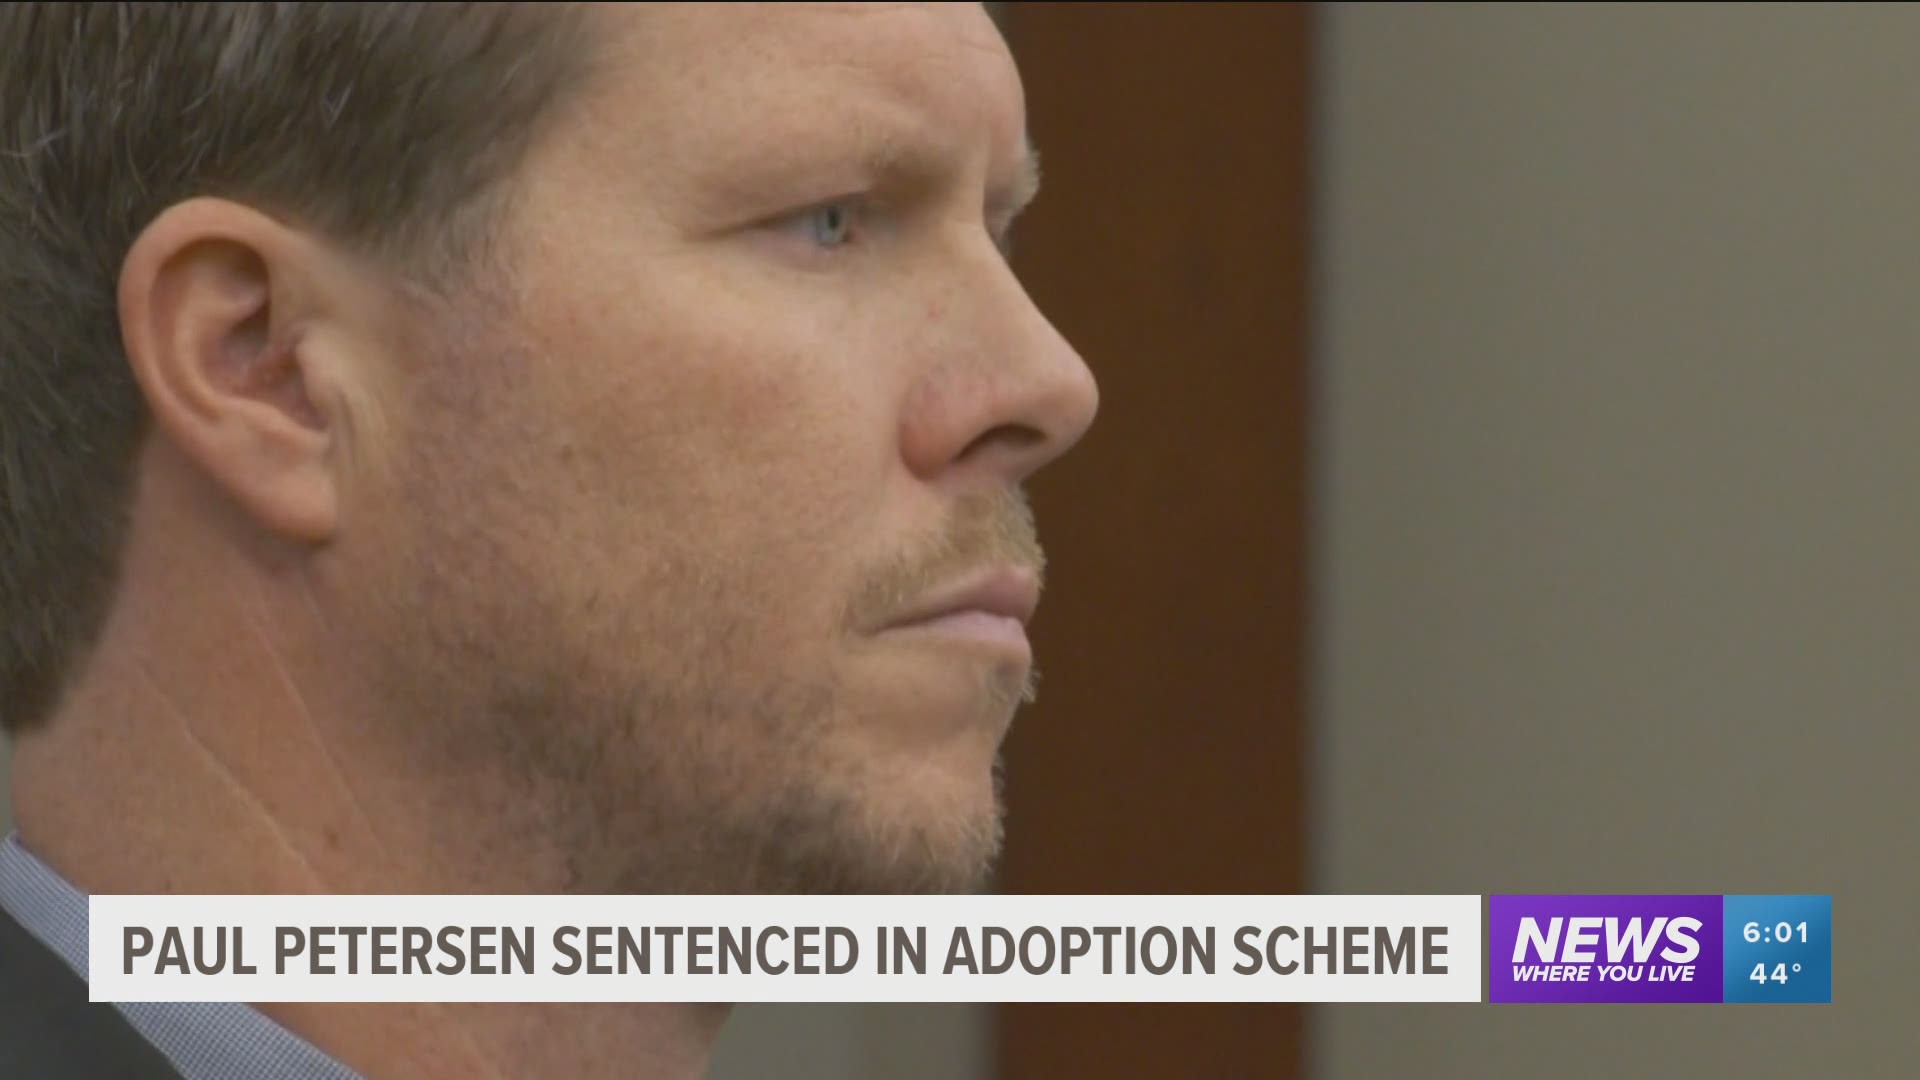 Paul Petersen was sentenced to more than six years (74 months) for his role in an Arkansas adoption scheme. https://bit.ly/39vRzI3